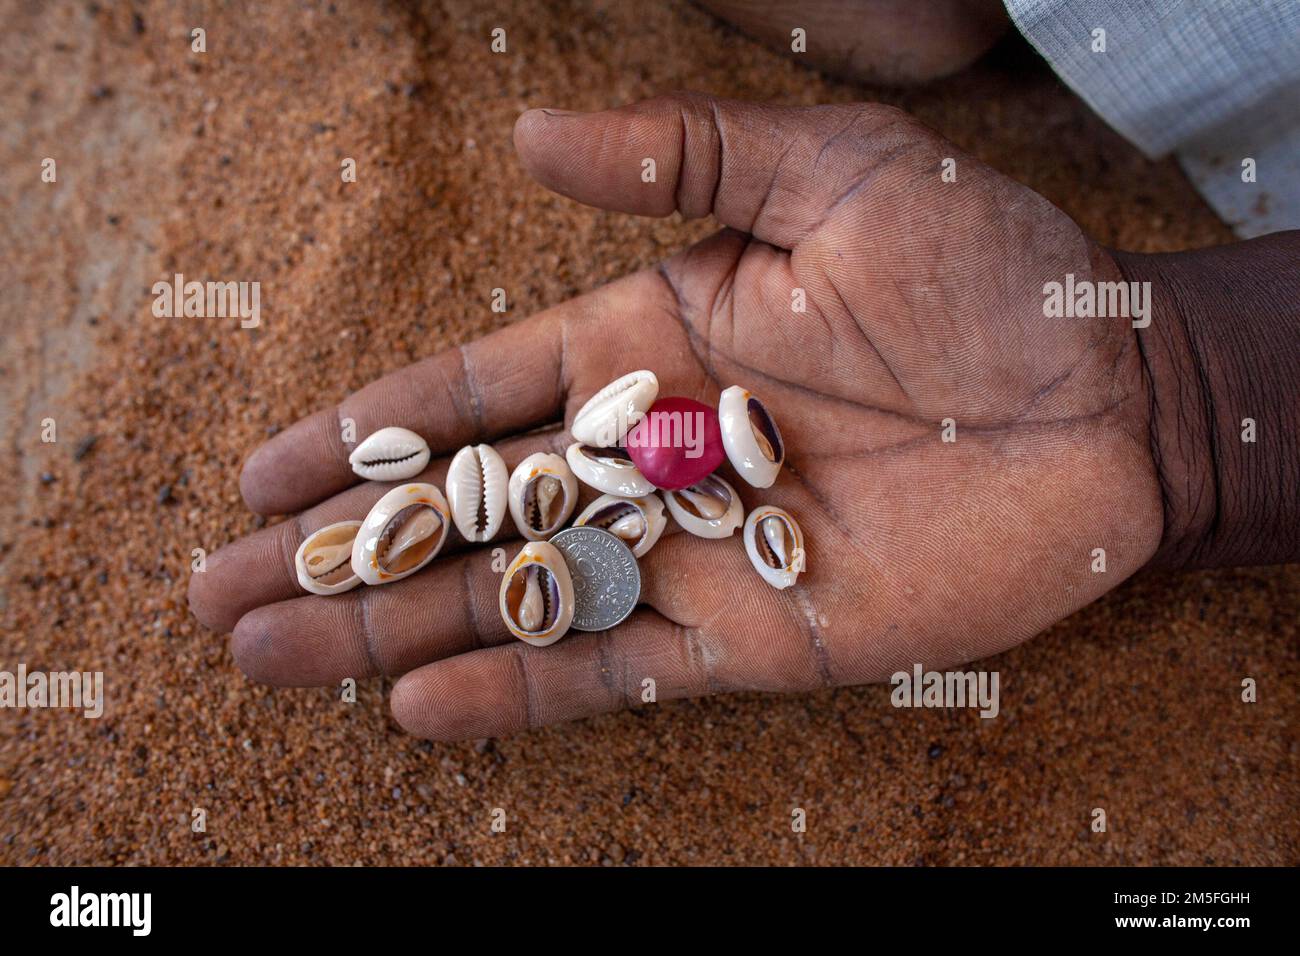 Cowrie shells are part of rituals in Africa. Cowrie shells became a popular tool in divination ceremonies. Stock Photo